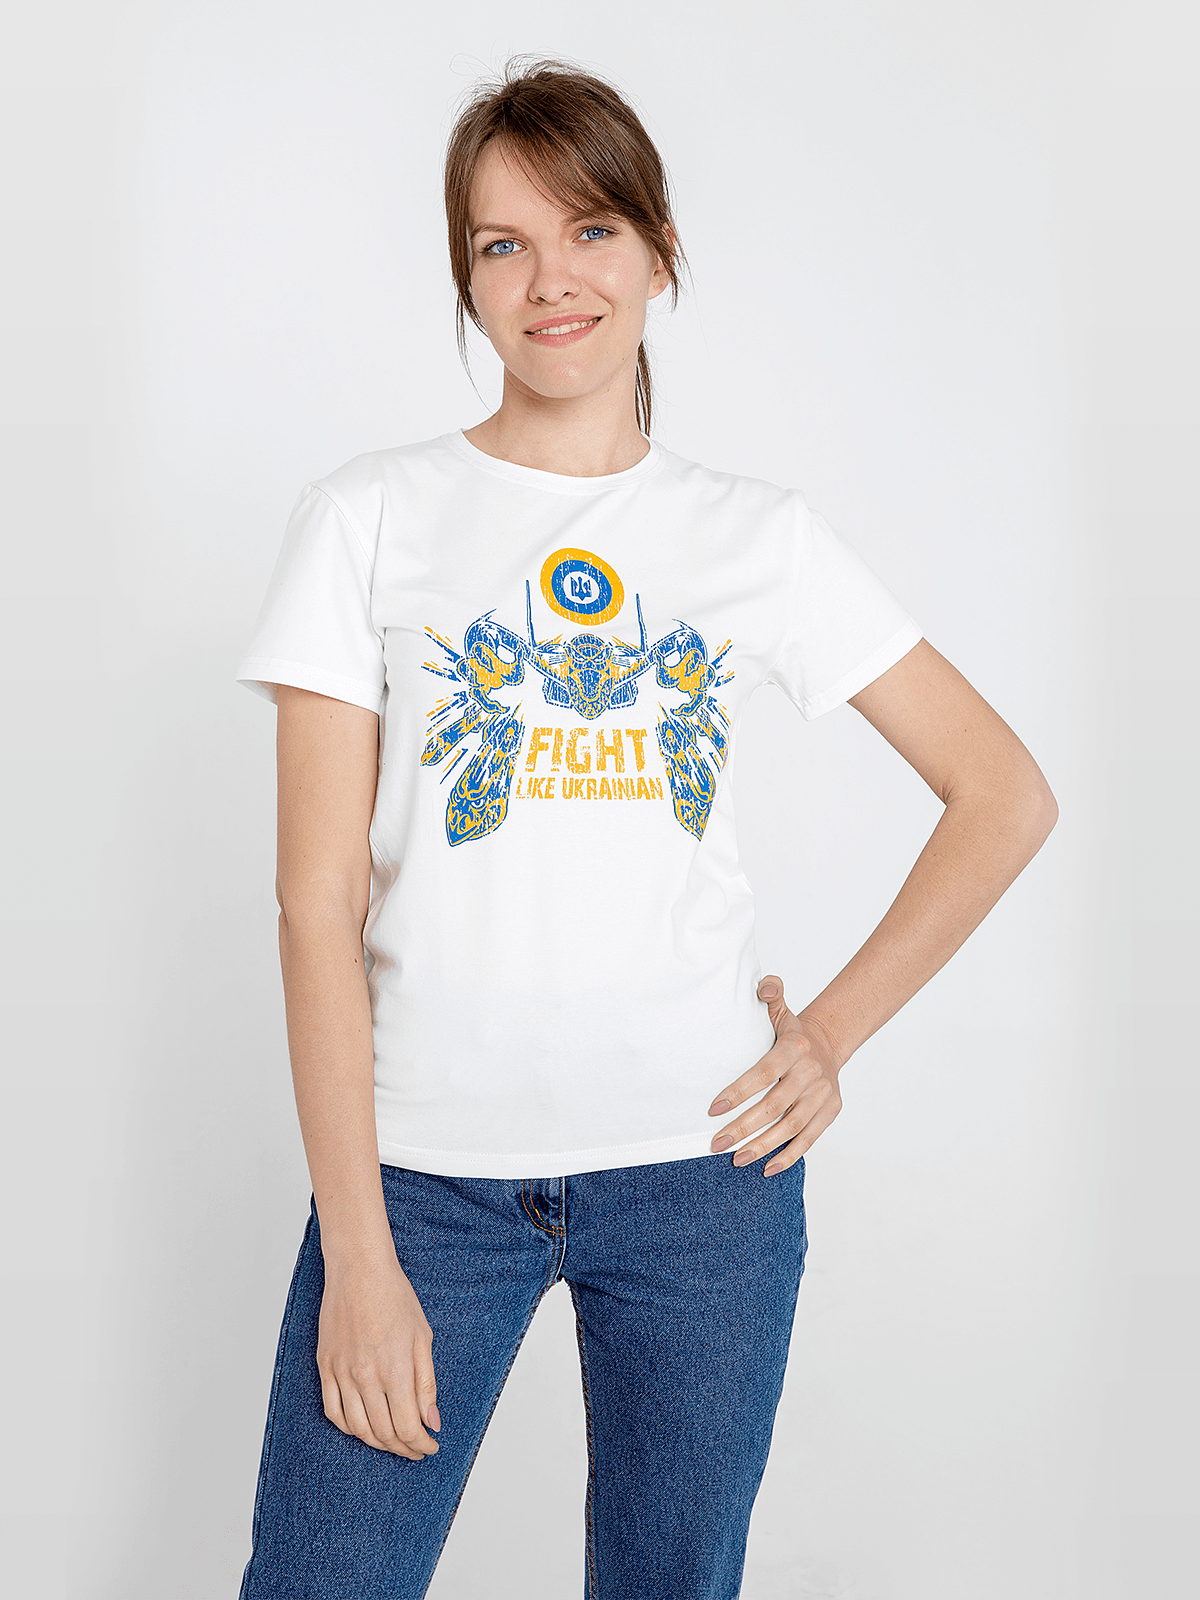 Women's T-Shirt Flu. Color off-white. All income is directed to support 